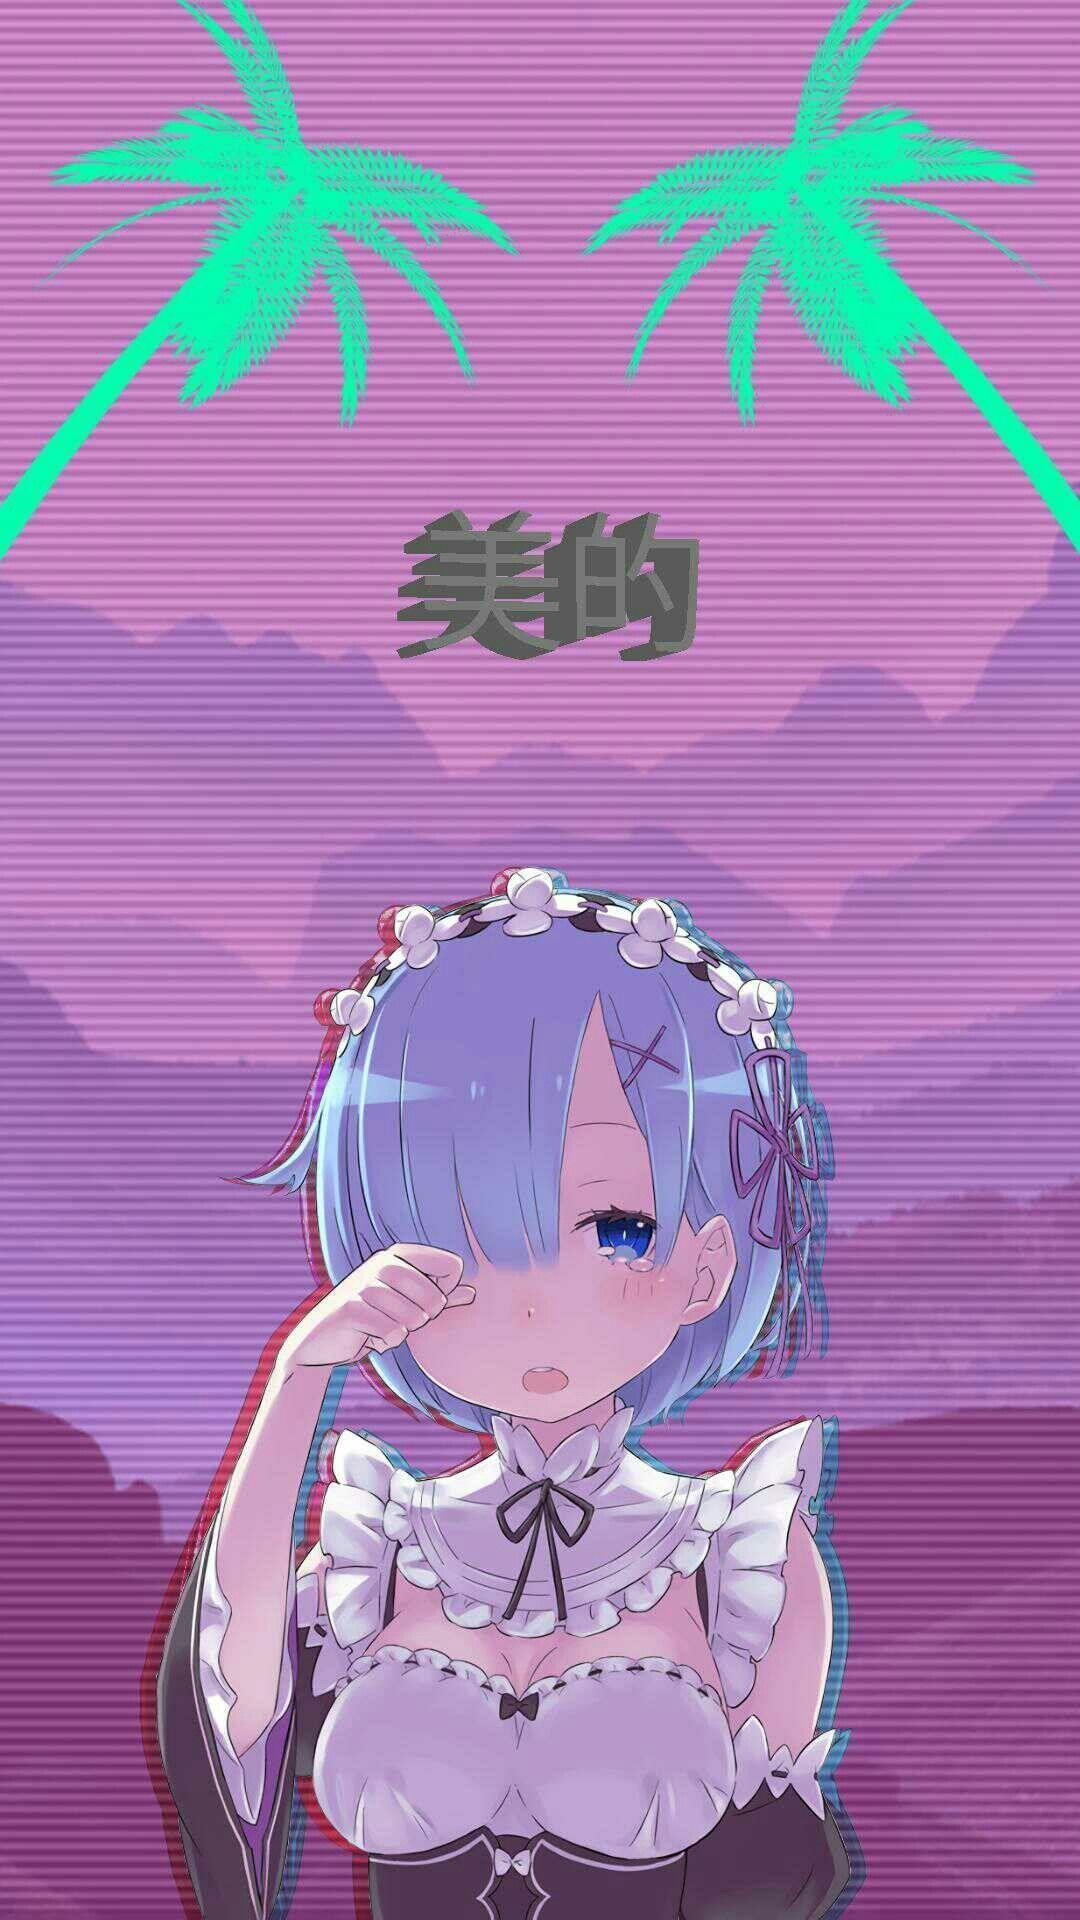 1080 x 1920 · jpeg - Anime Aesthetic Wallpapers - Wallpaper Cave